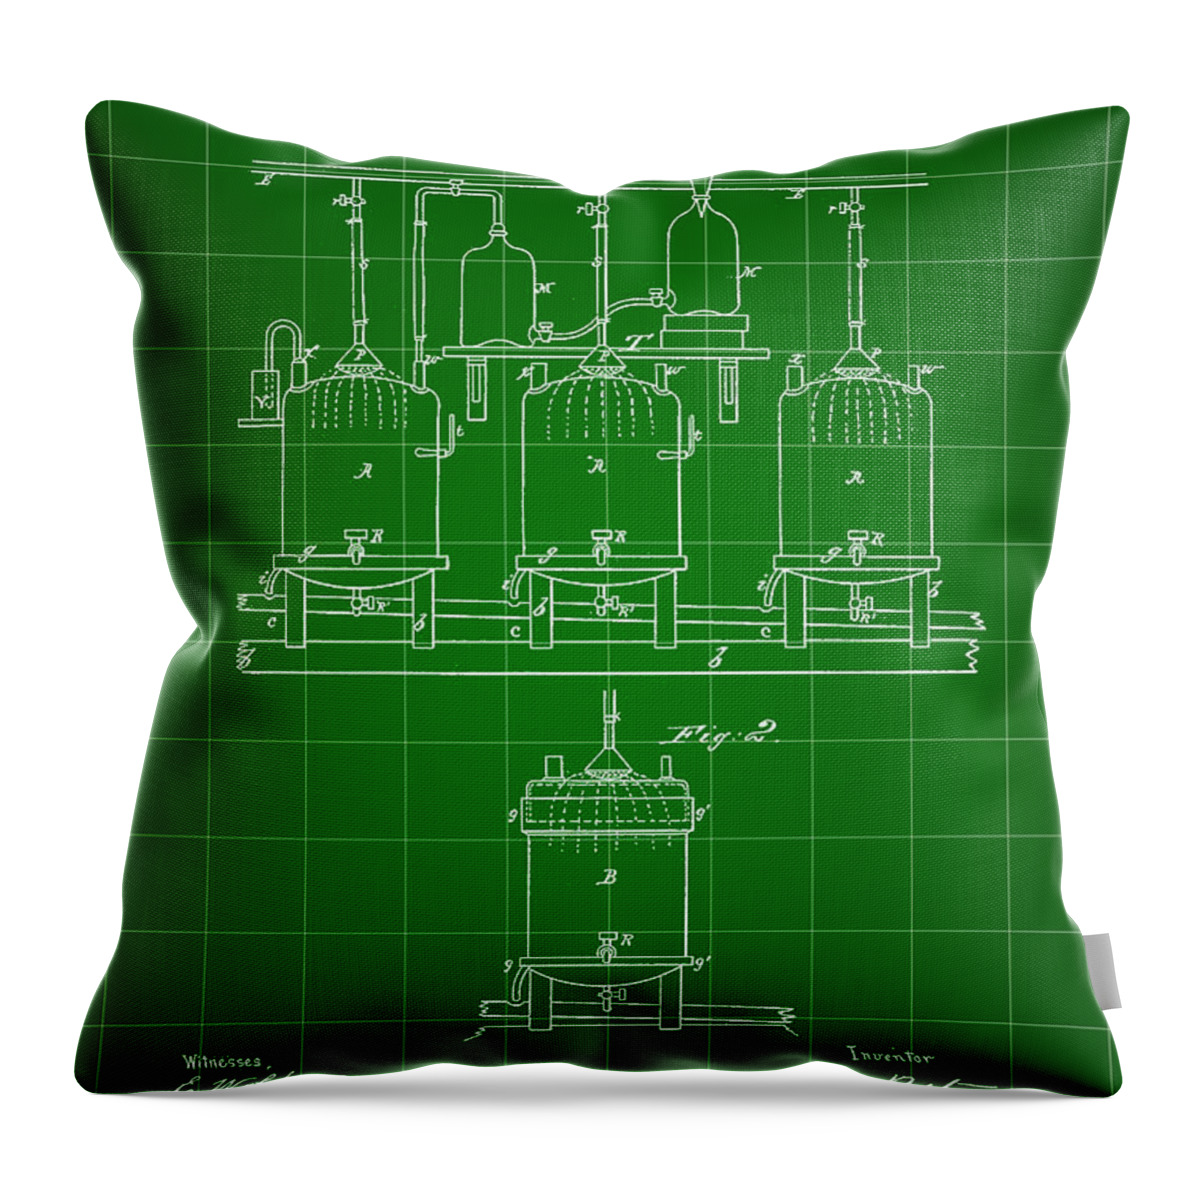 Beer Throw Pillow featuring the digital art Louis Pasteur Beer Brewing Patent 1873 - Green by Stephen Younts